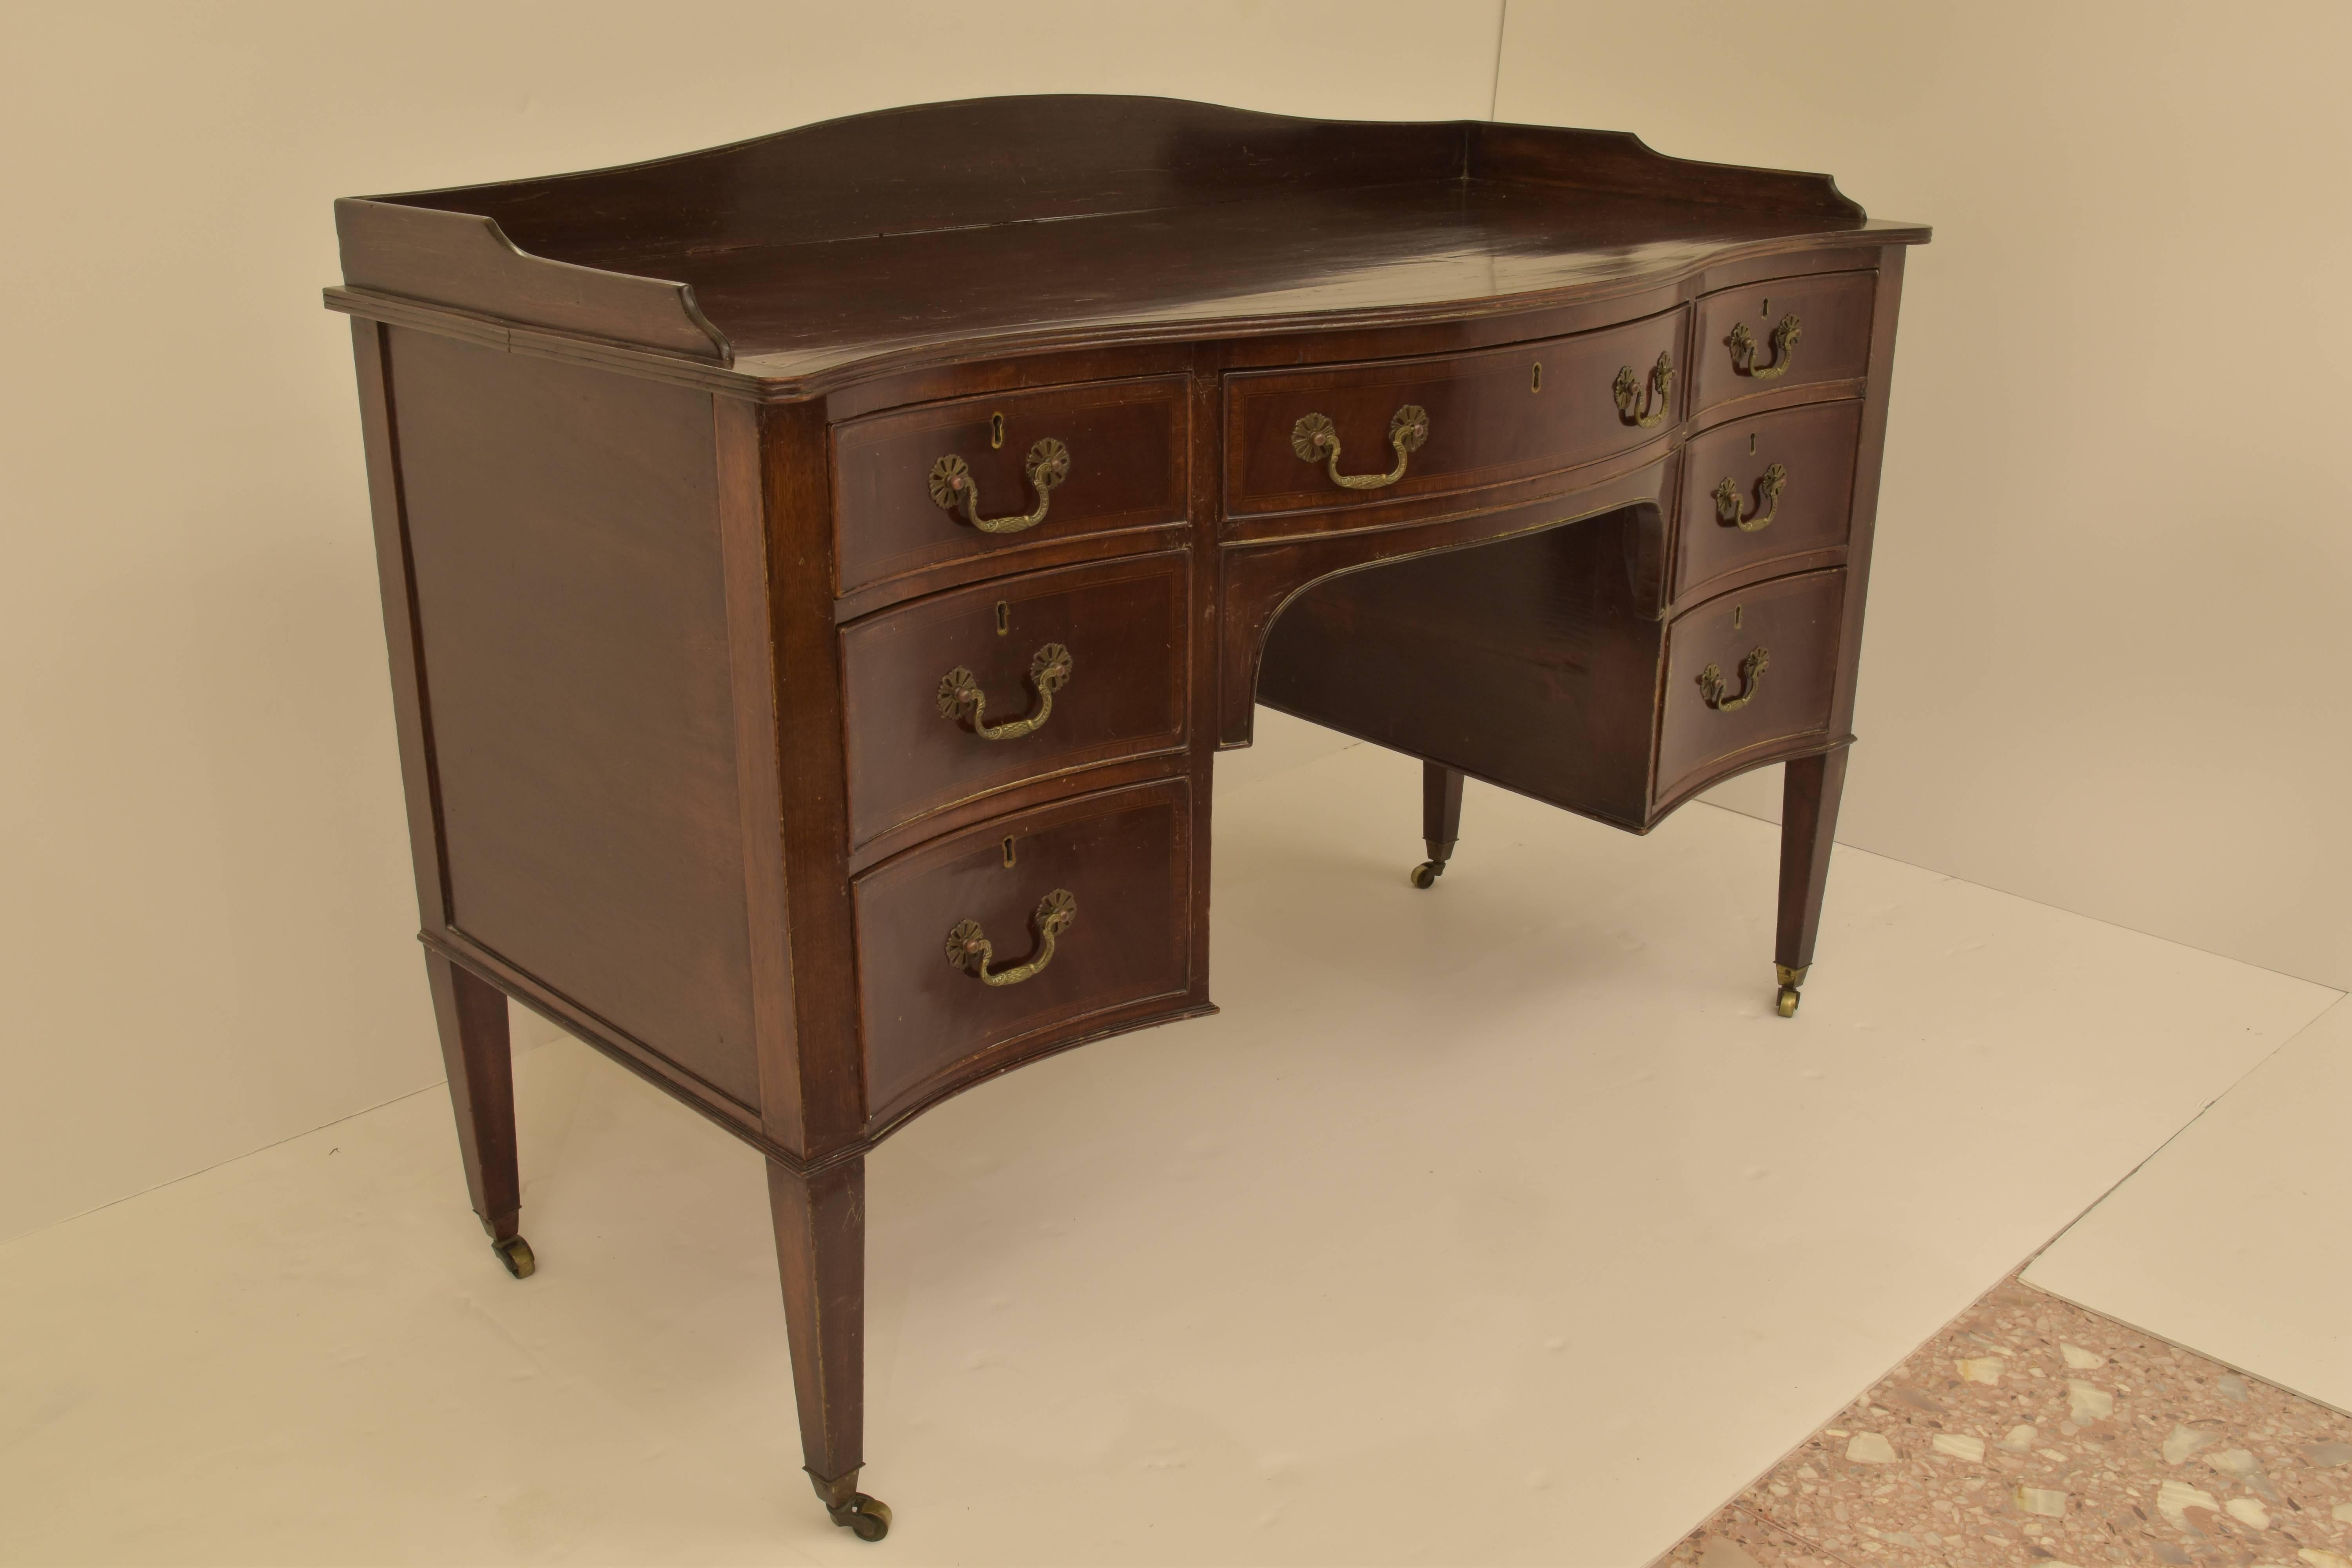 A mahogany ladies writing desk with seven drawers on brass castors.